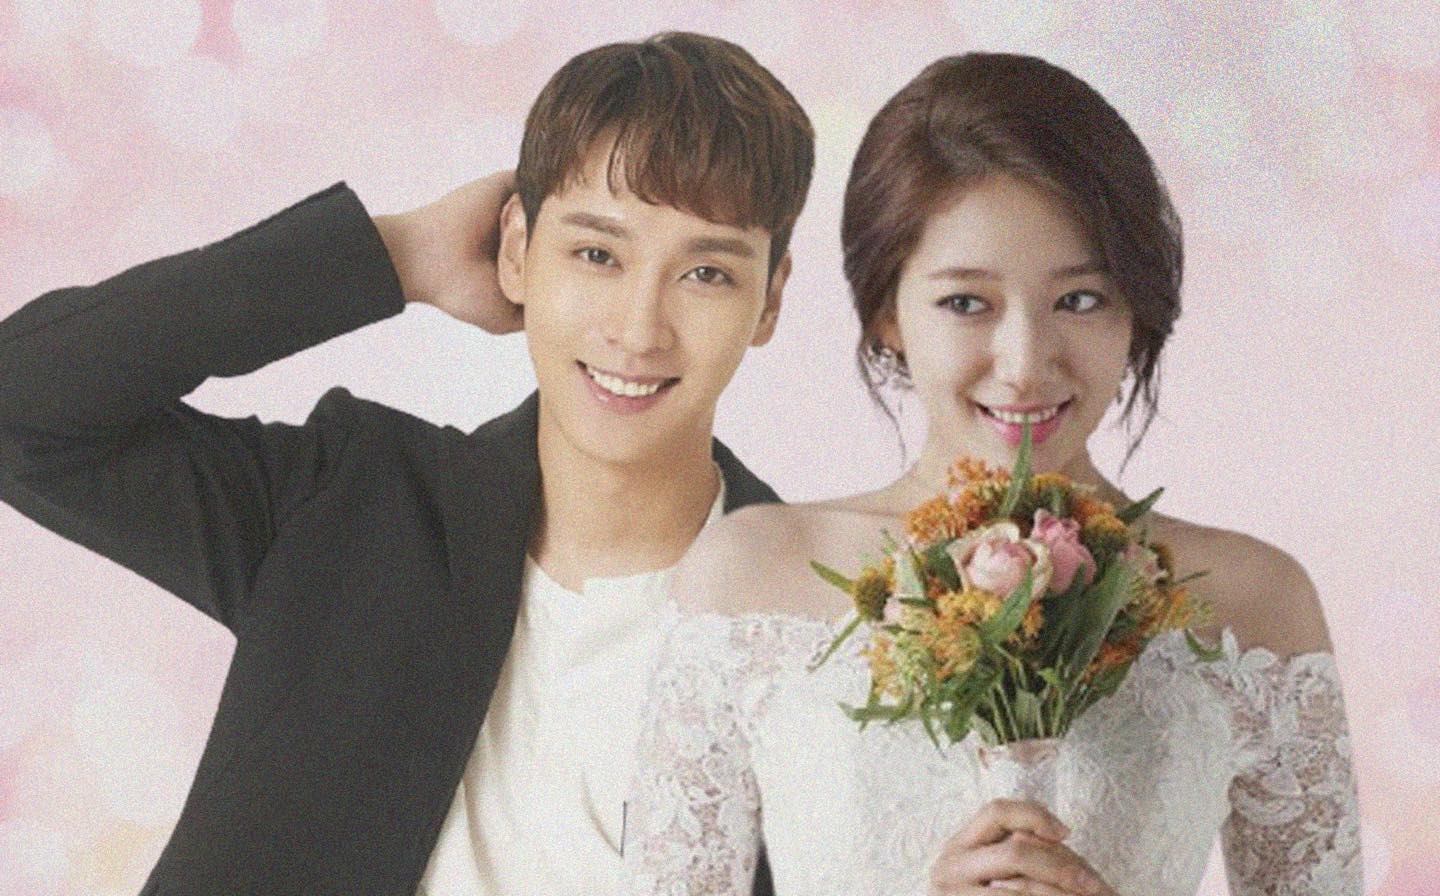 BREAKING NEWS: Park Shin Hye and Choi Tae Joon confirmed to get married on  January 22, Park Shin Hye is pregnant - KBIZoom